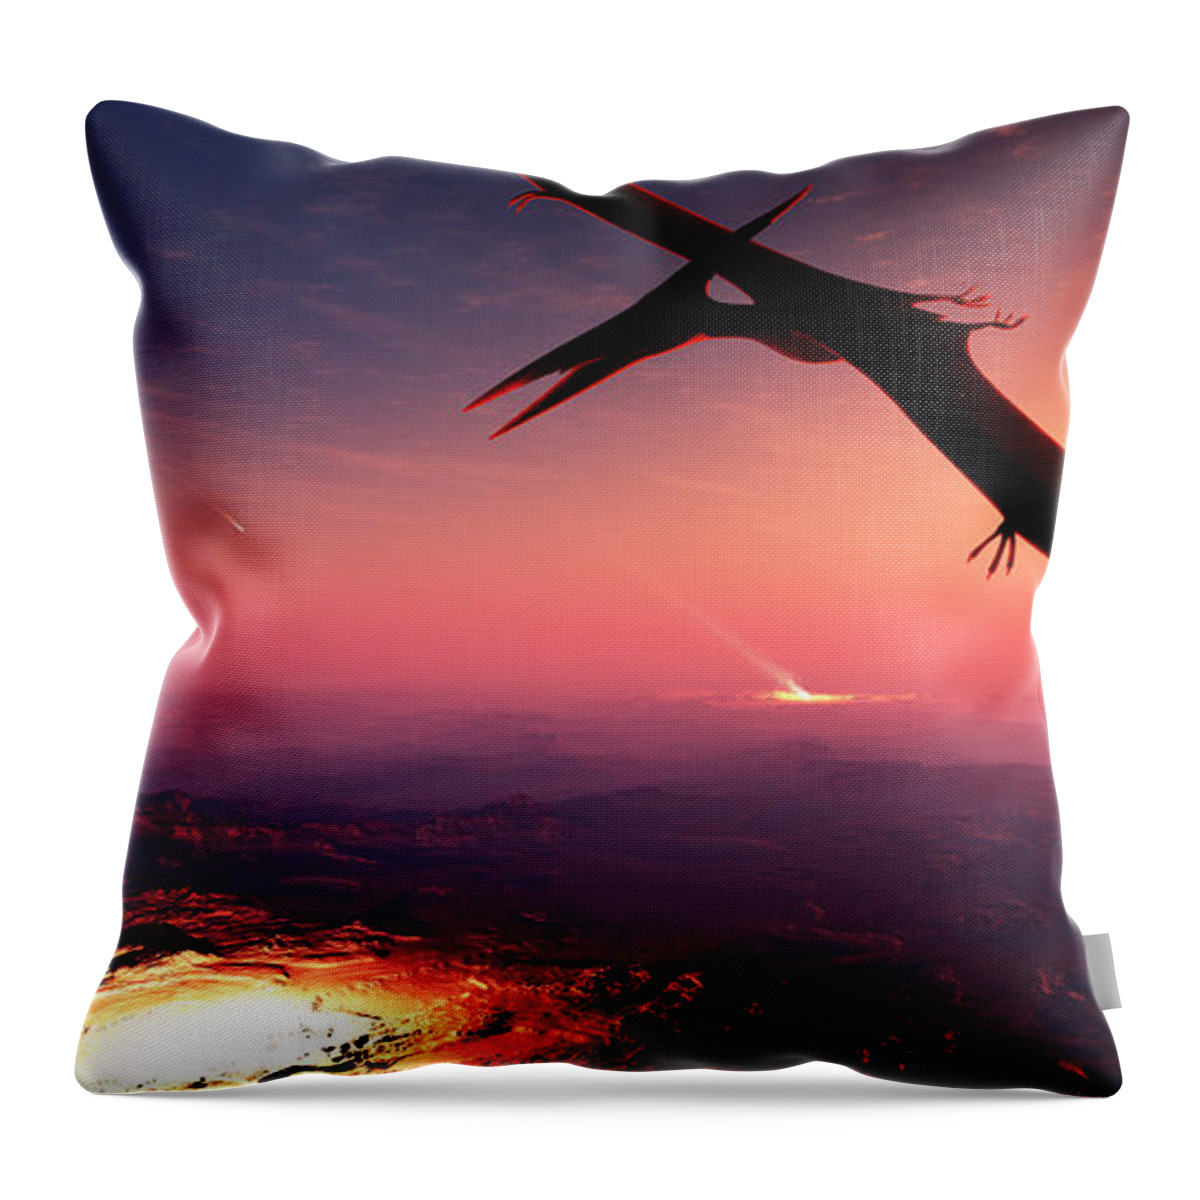 Meteorite Throw Pillow featuring the photograph Extinction of the Dinosaurs by Johan Swanepoel